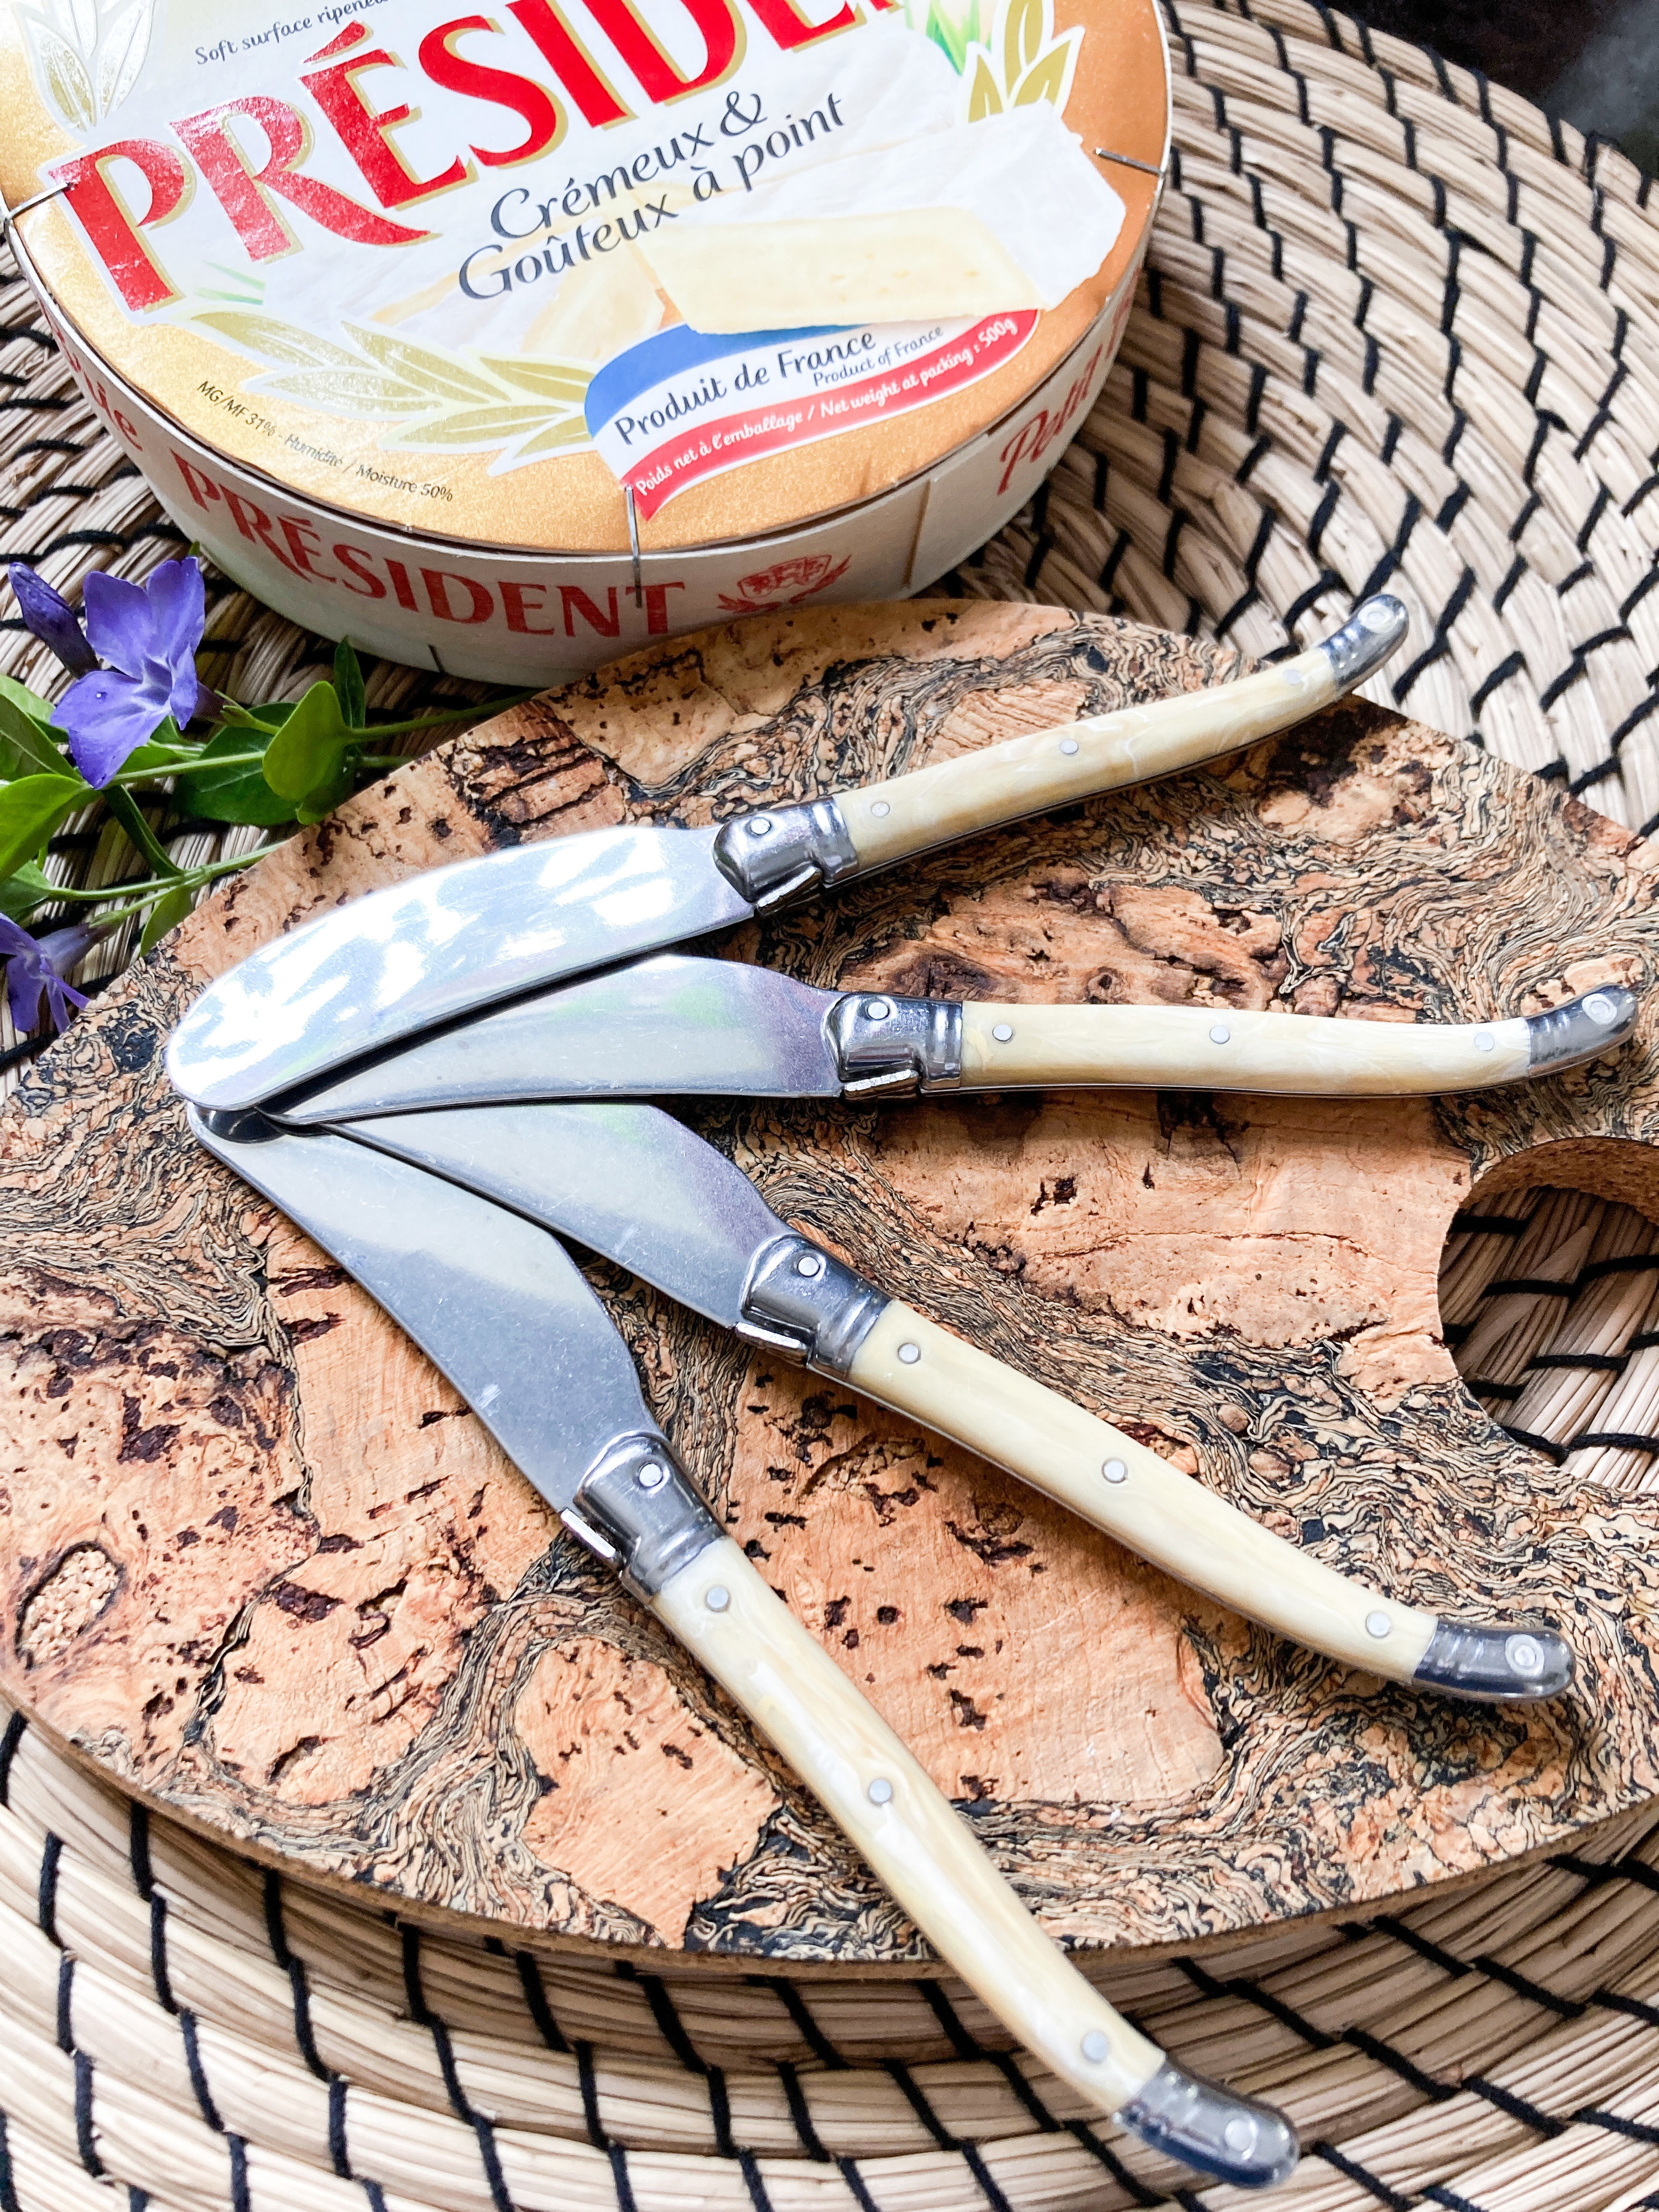 A flatlay of four charcuterie knives on a cork trivet next to creamy brie